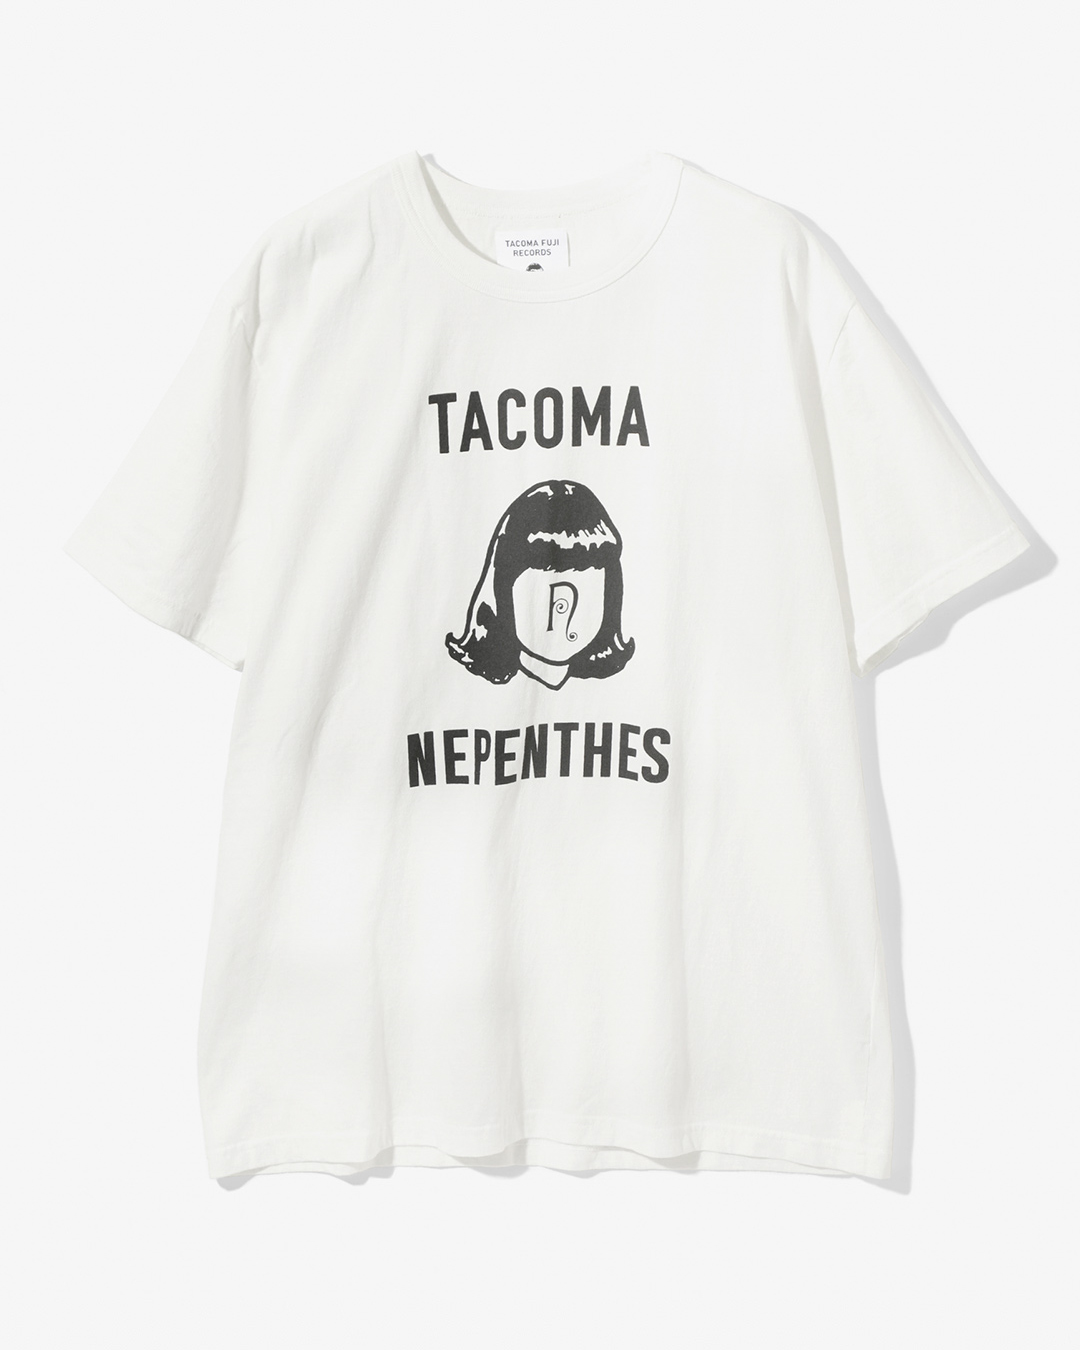 SOUTH2 WEST8の別注アイテムも登場。TACOMA FUJI RECORDSがNEPENTHES